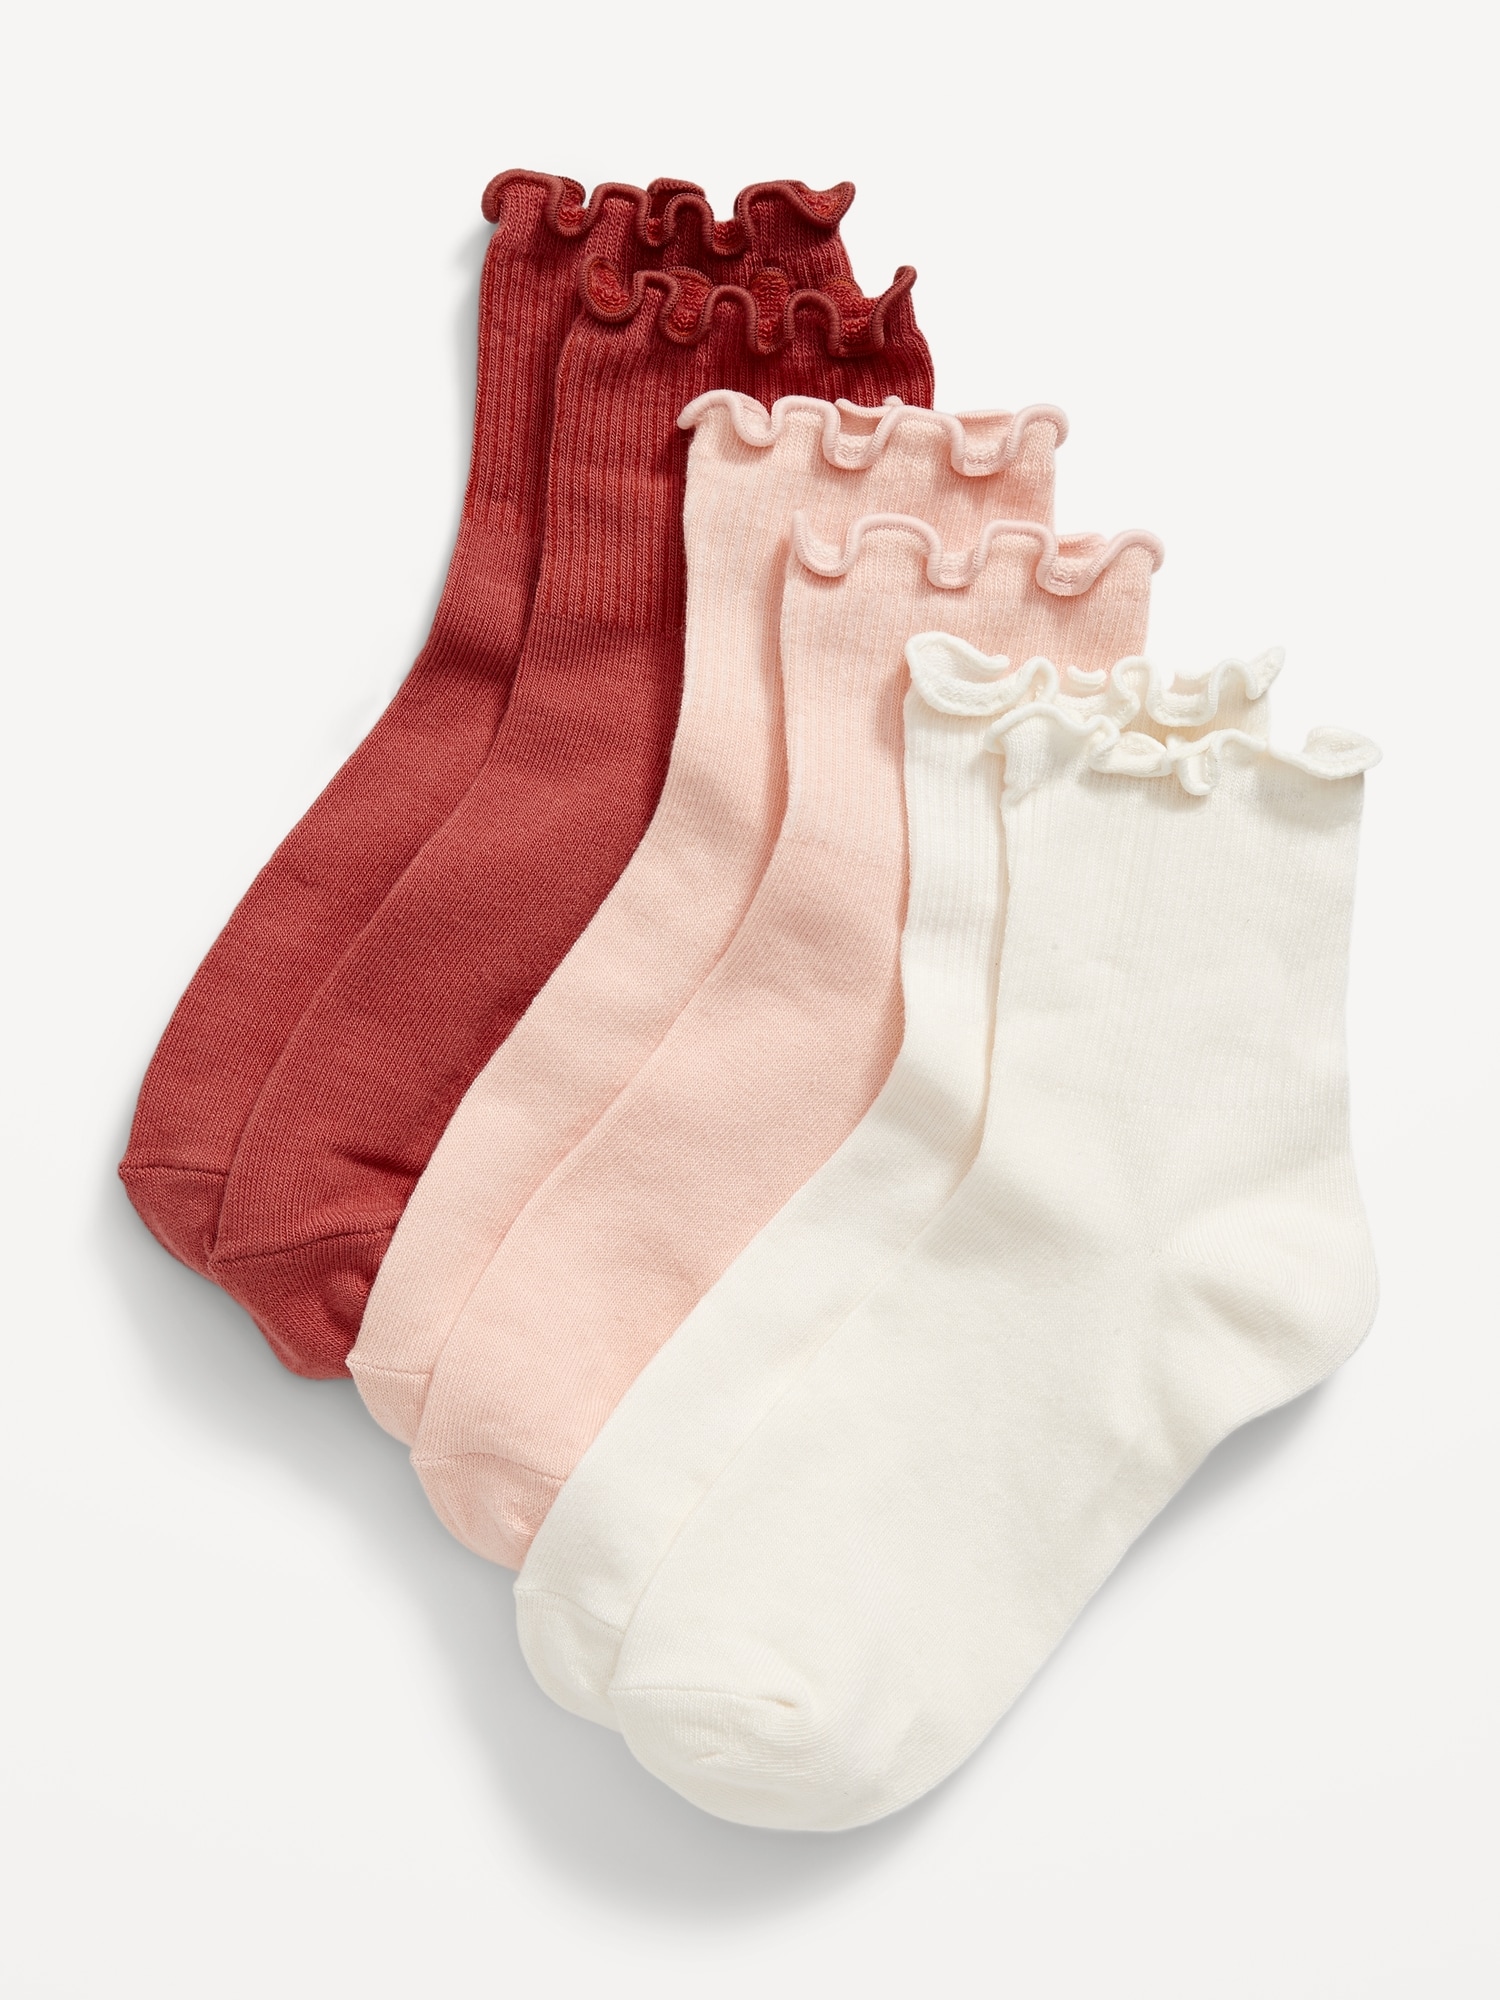 Old Navy Ruffle-Cuff Quarter-Crew Socks 3-Pack for Girls pink. 1